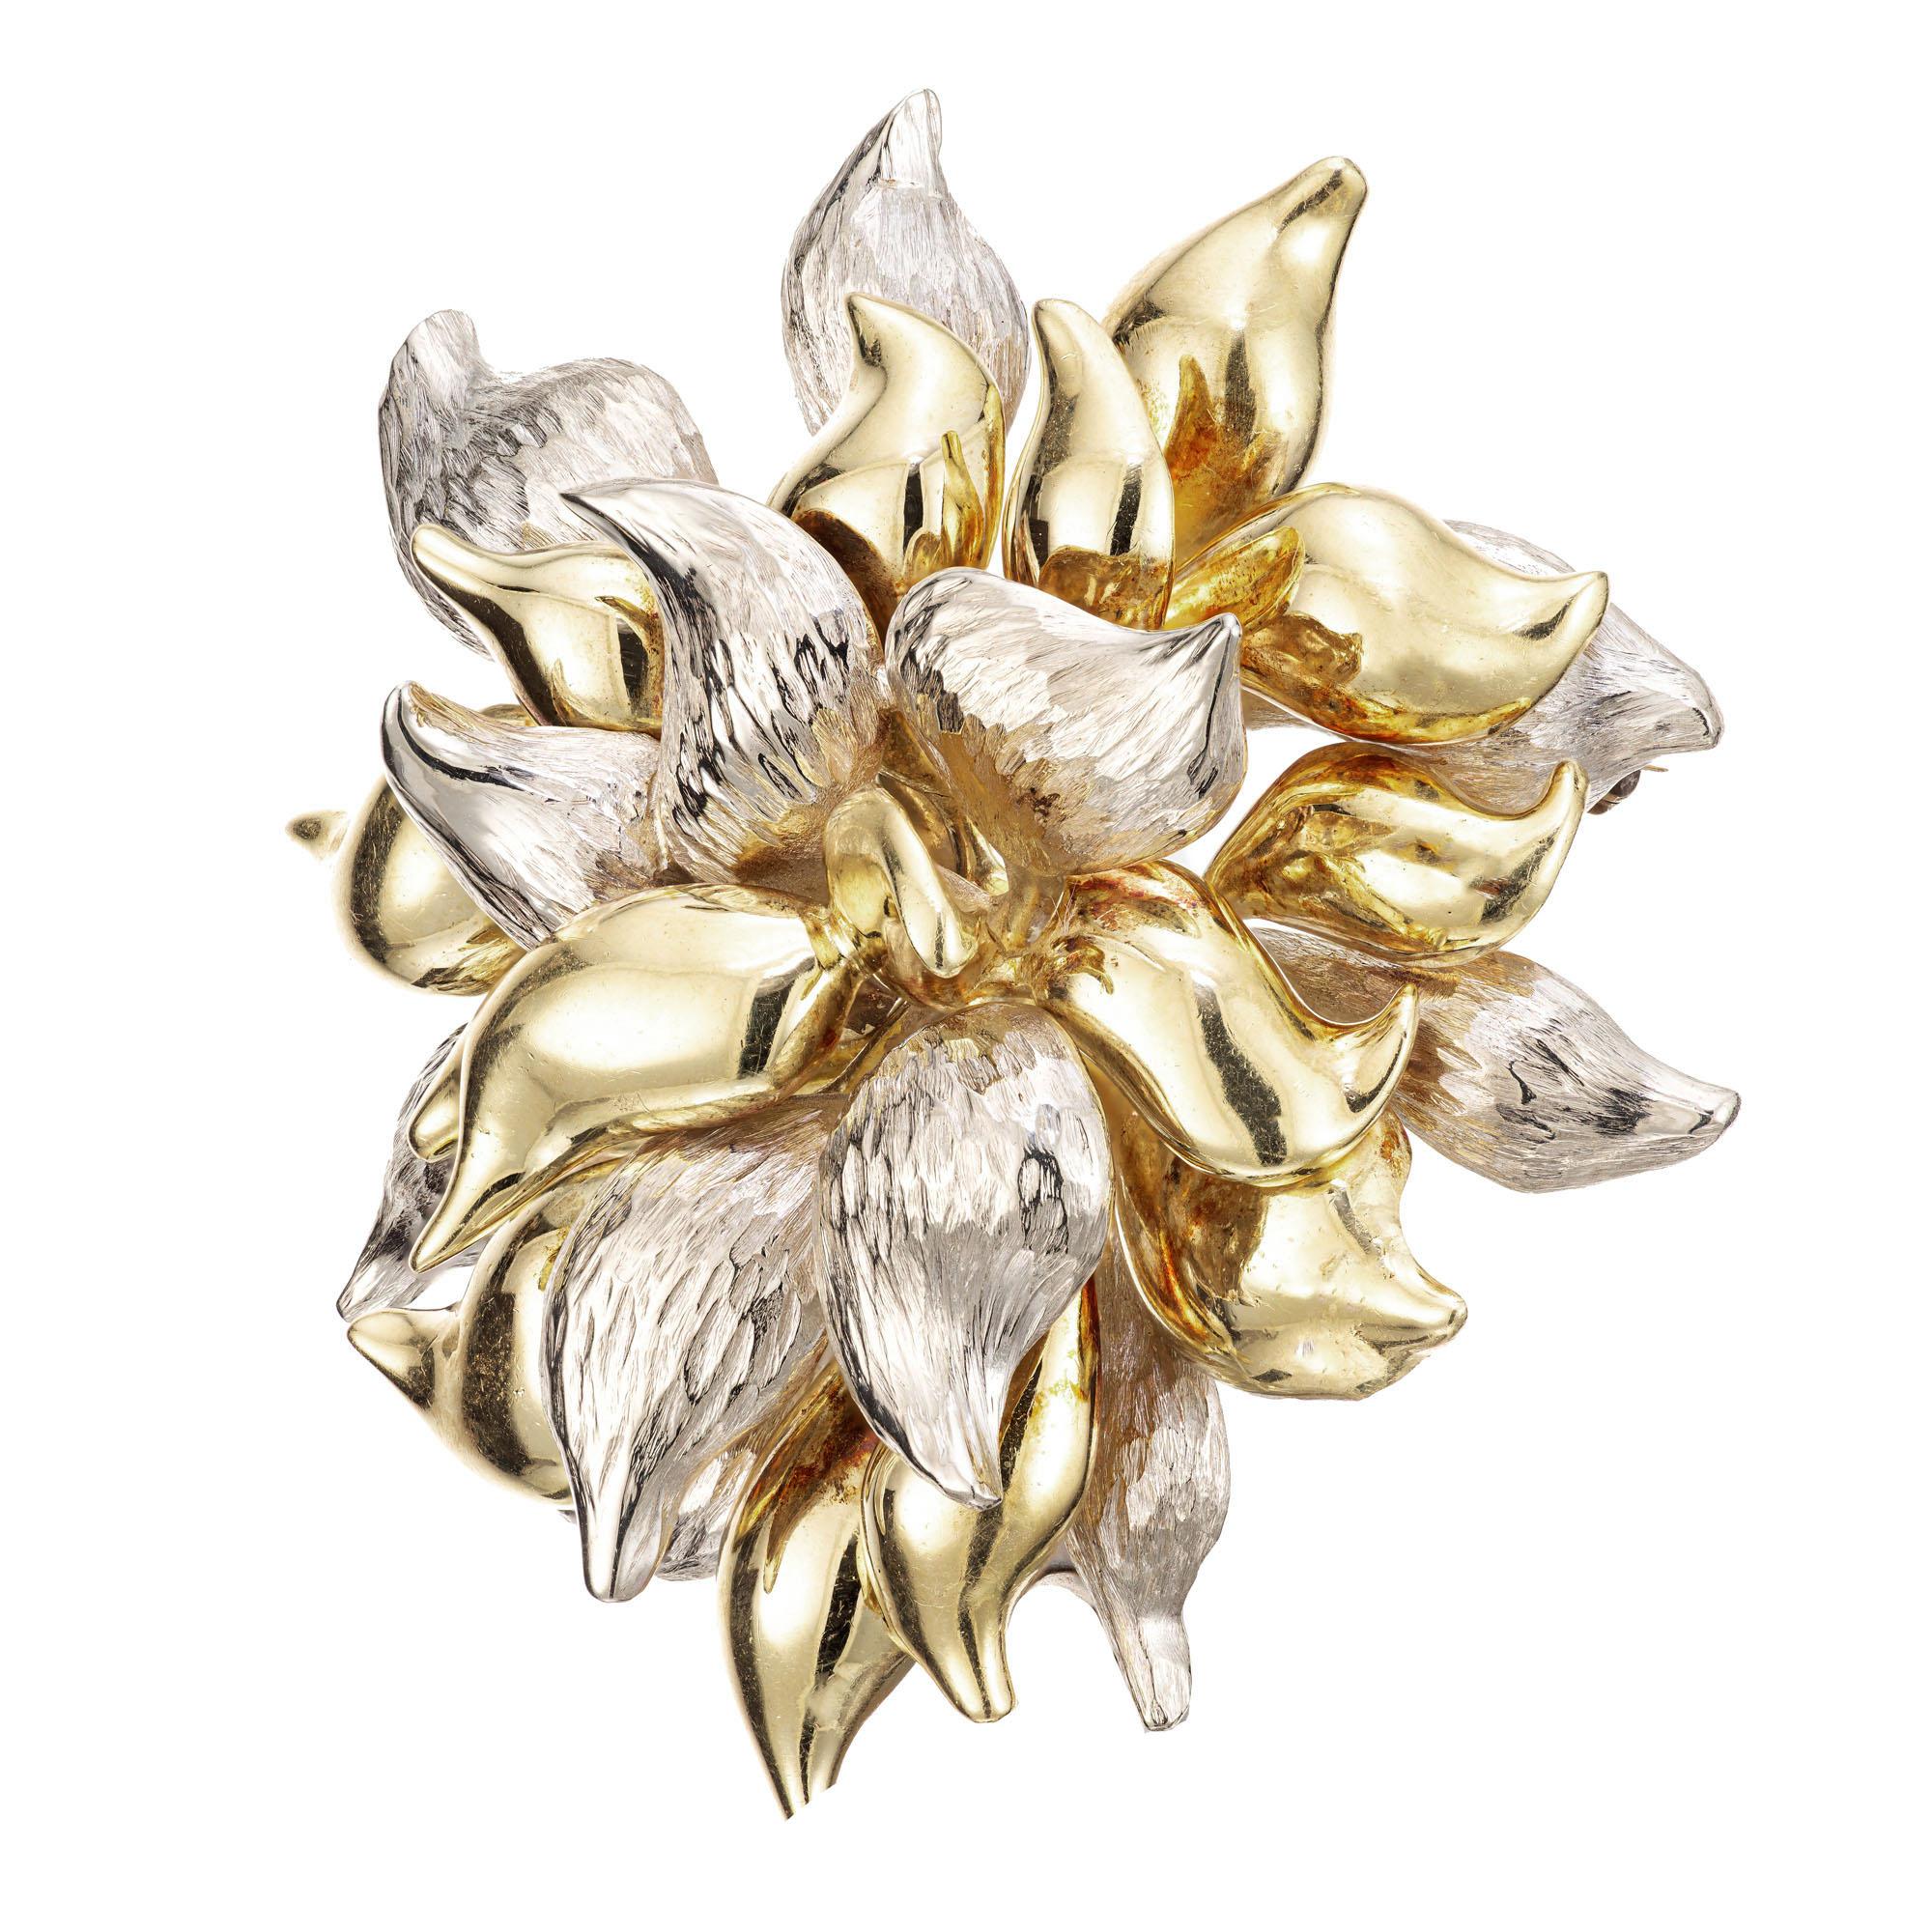 1950's Tiffany & Co. 18k yellow and white gold textured, 3D flower brooch. Signed Tiffany Italy. 

Diameter: 51.85mm or 2.04 inches
Depth: 18.42mm
40.7 grams
Tested: 18k
Stamped: K18 Italy
Hallmark: Tiffany